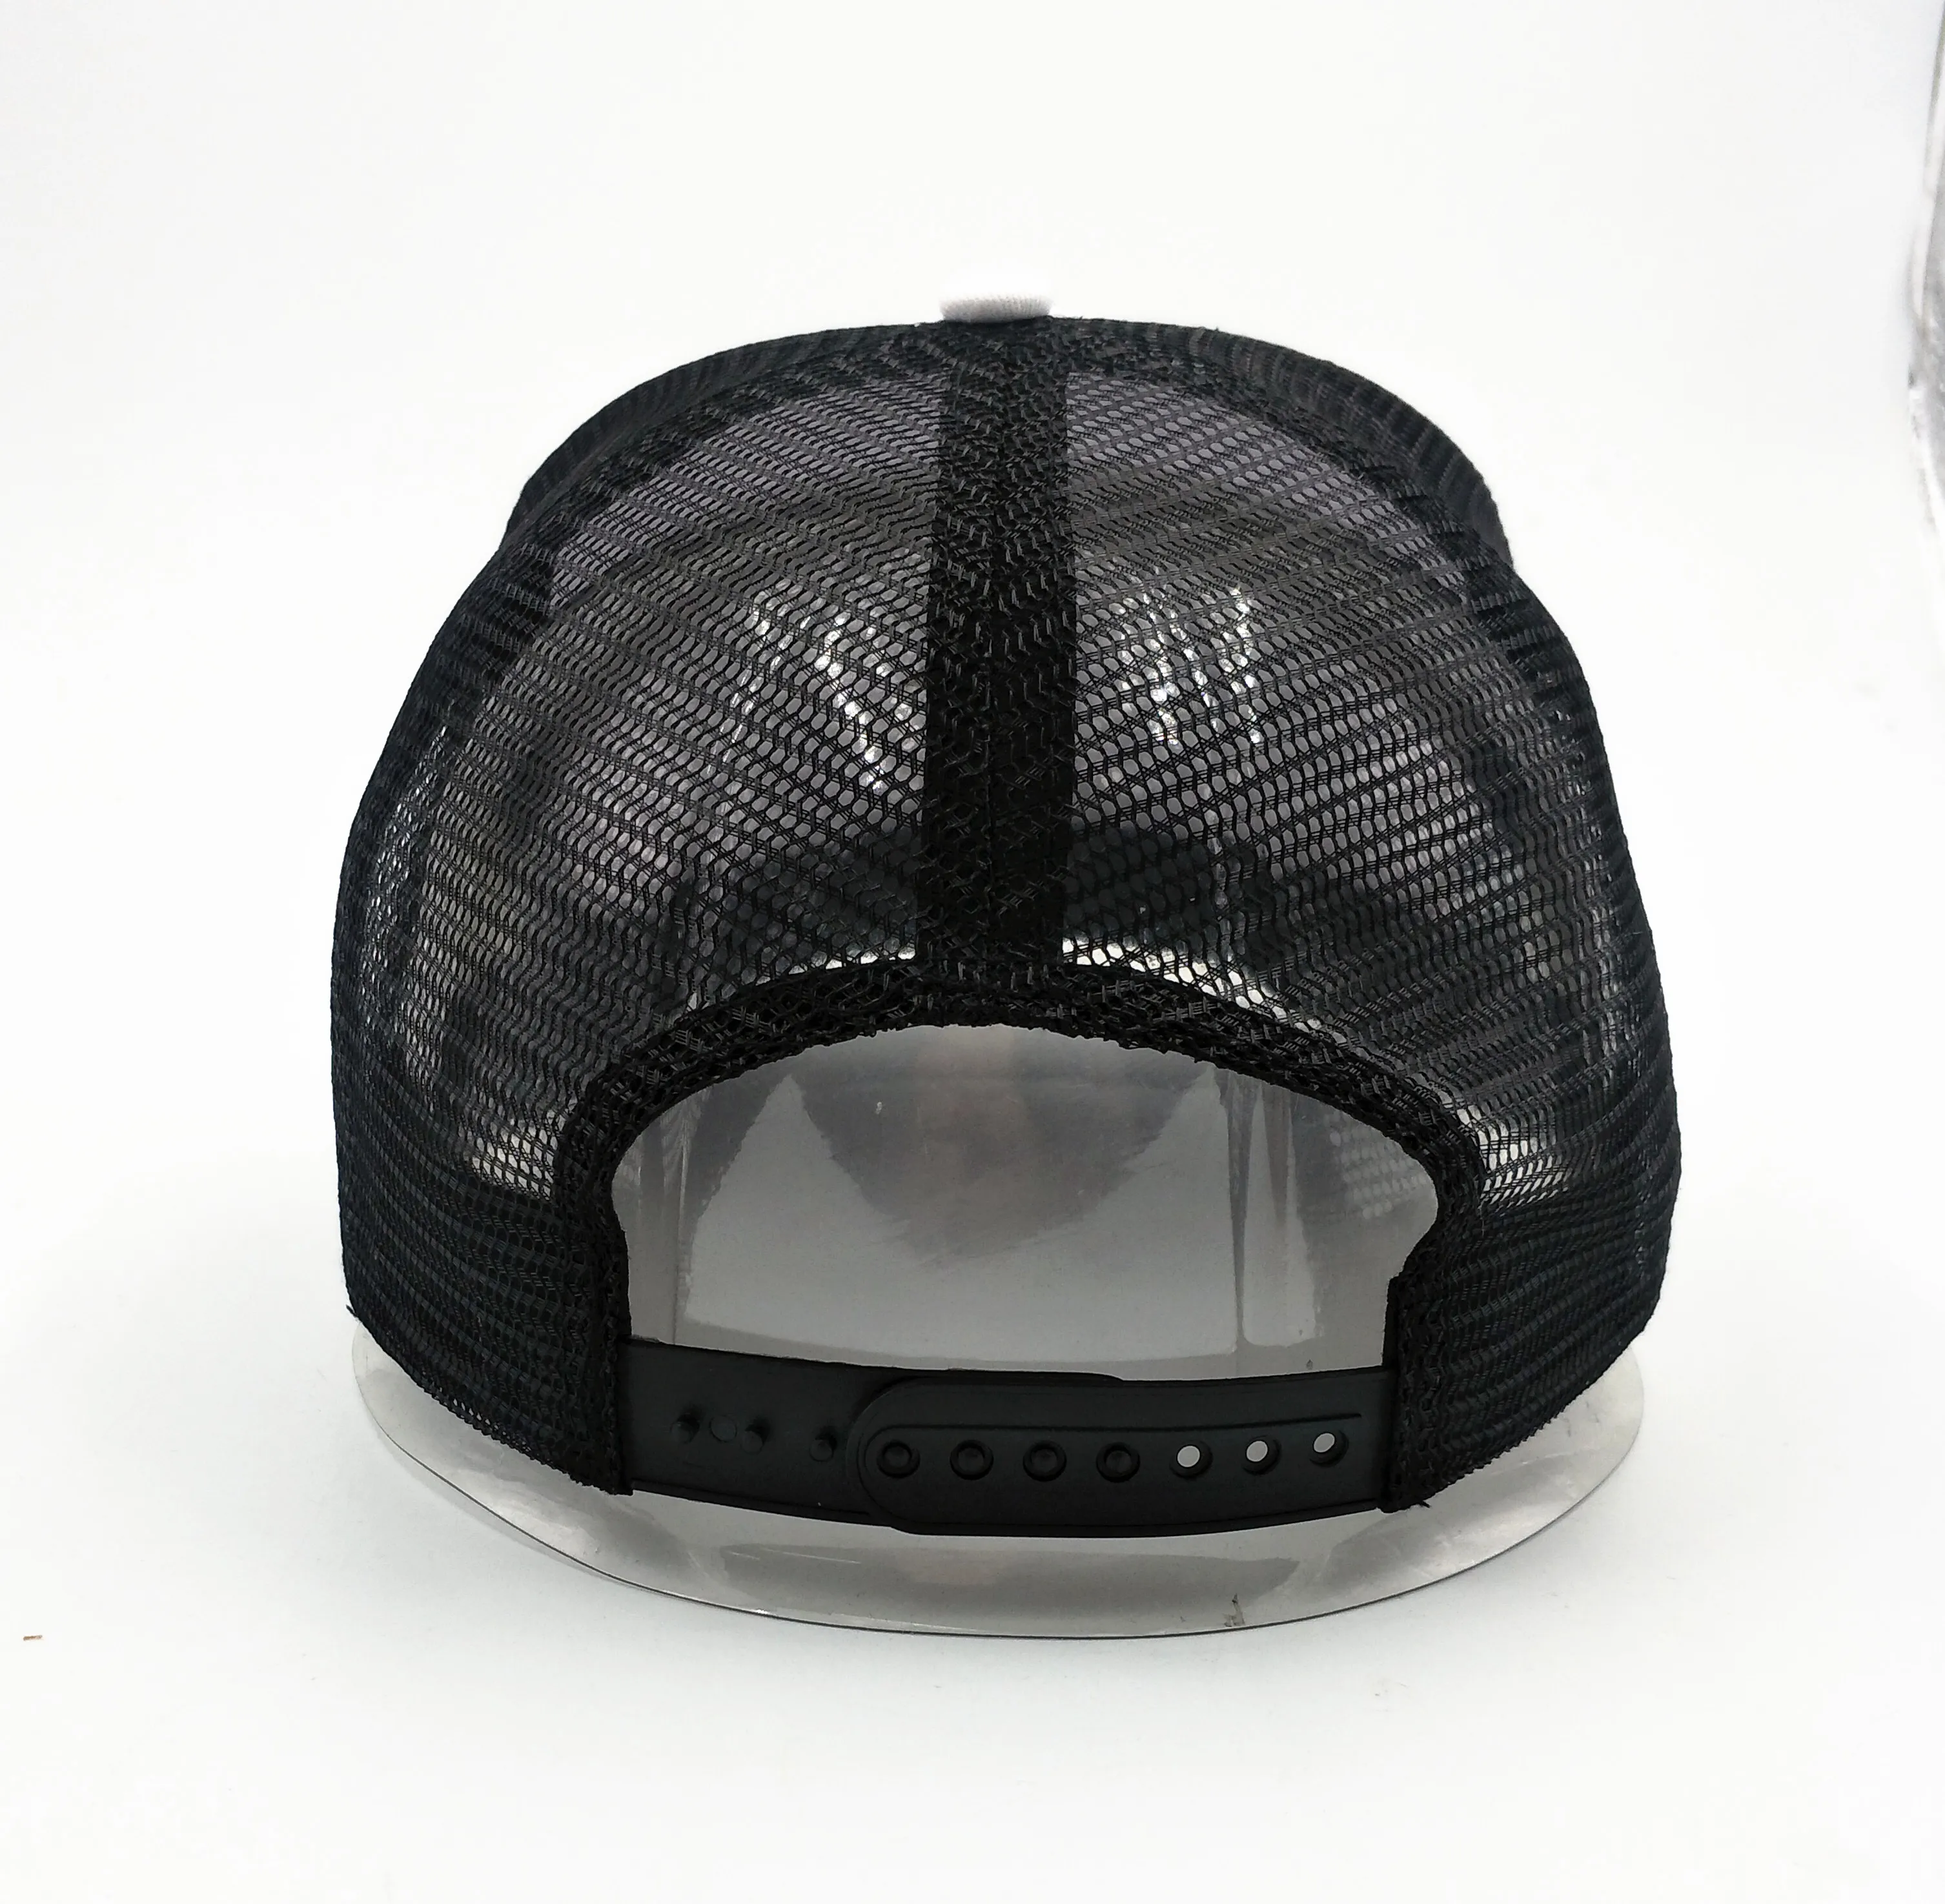 High Quality Trucker Hat Cap With Mesh At Back Black+white Mesh Cap Hat ...